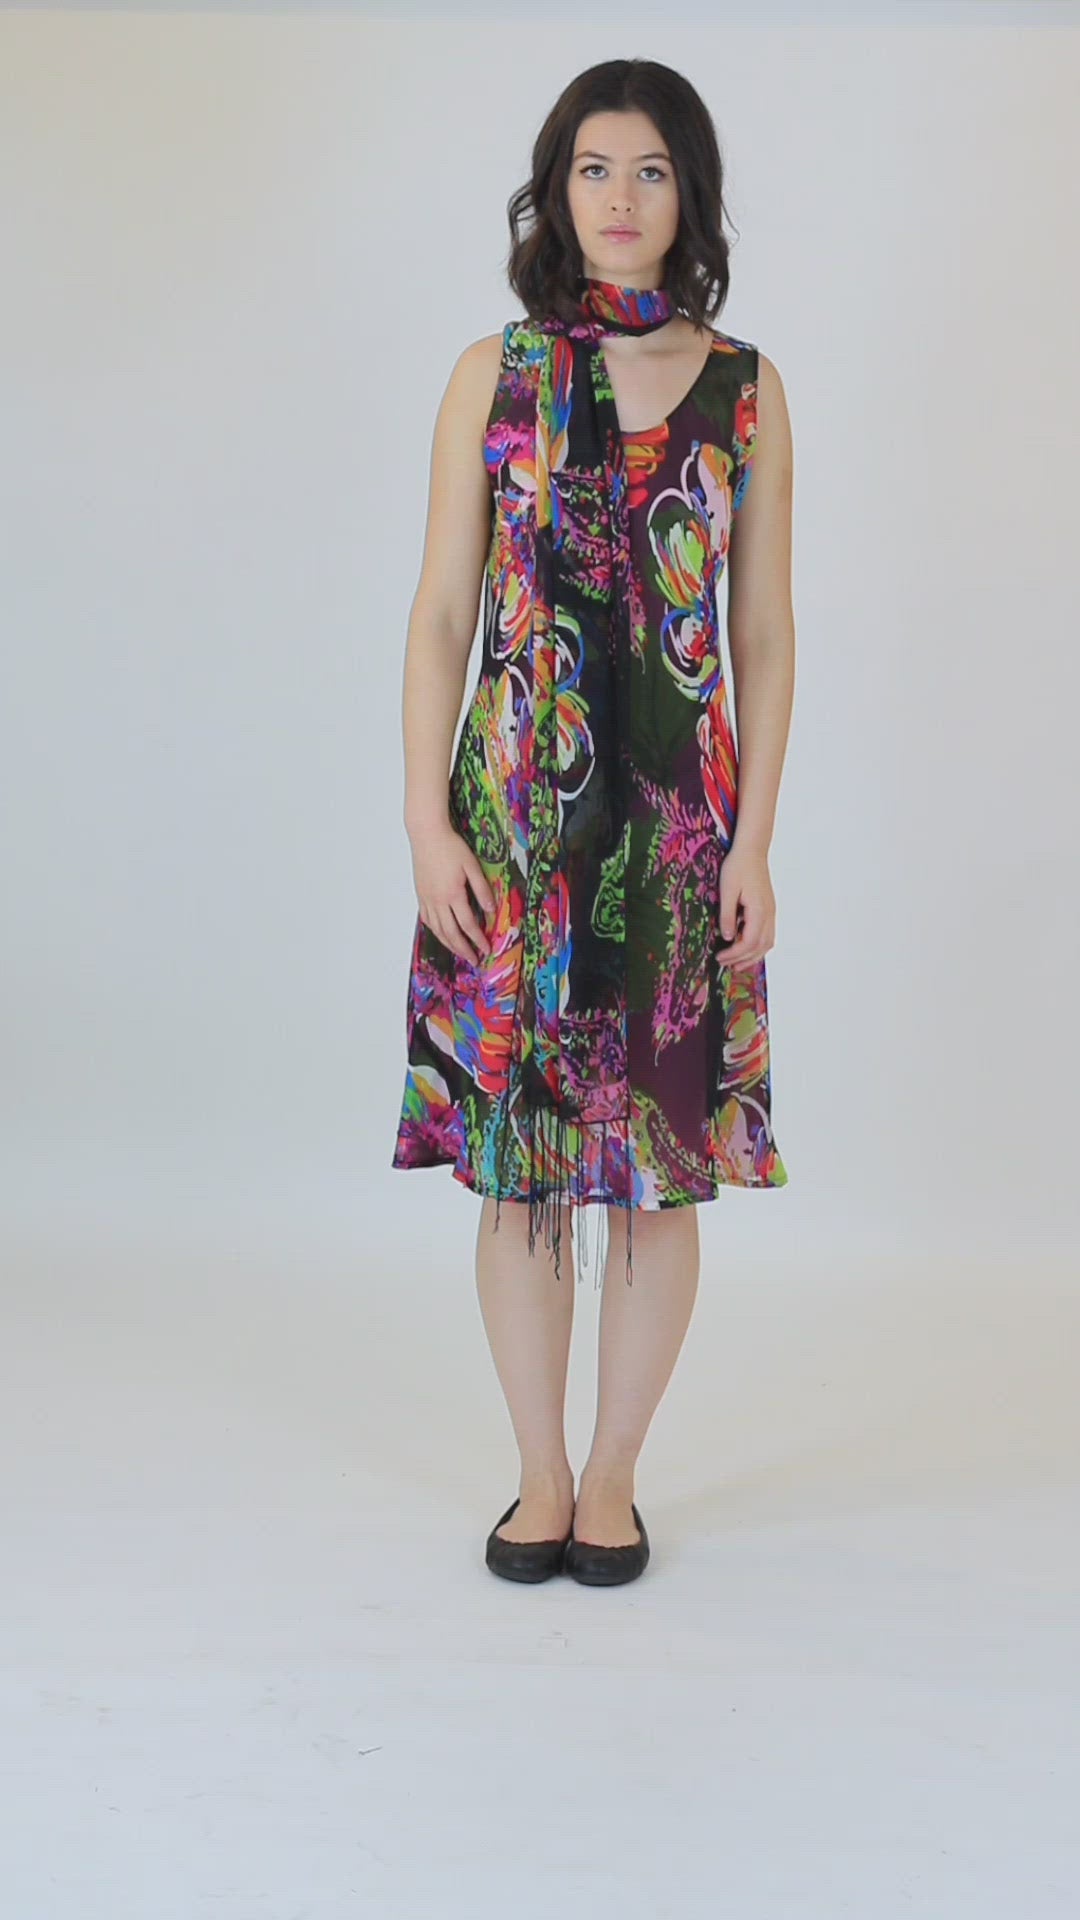 THE REVERSIBLE STYLISH DRESS WITH A SCARF